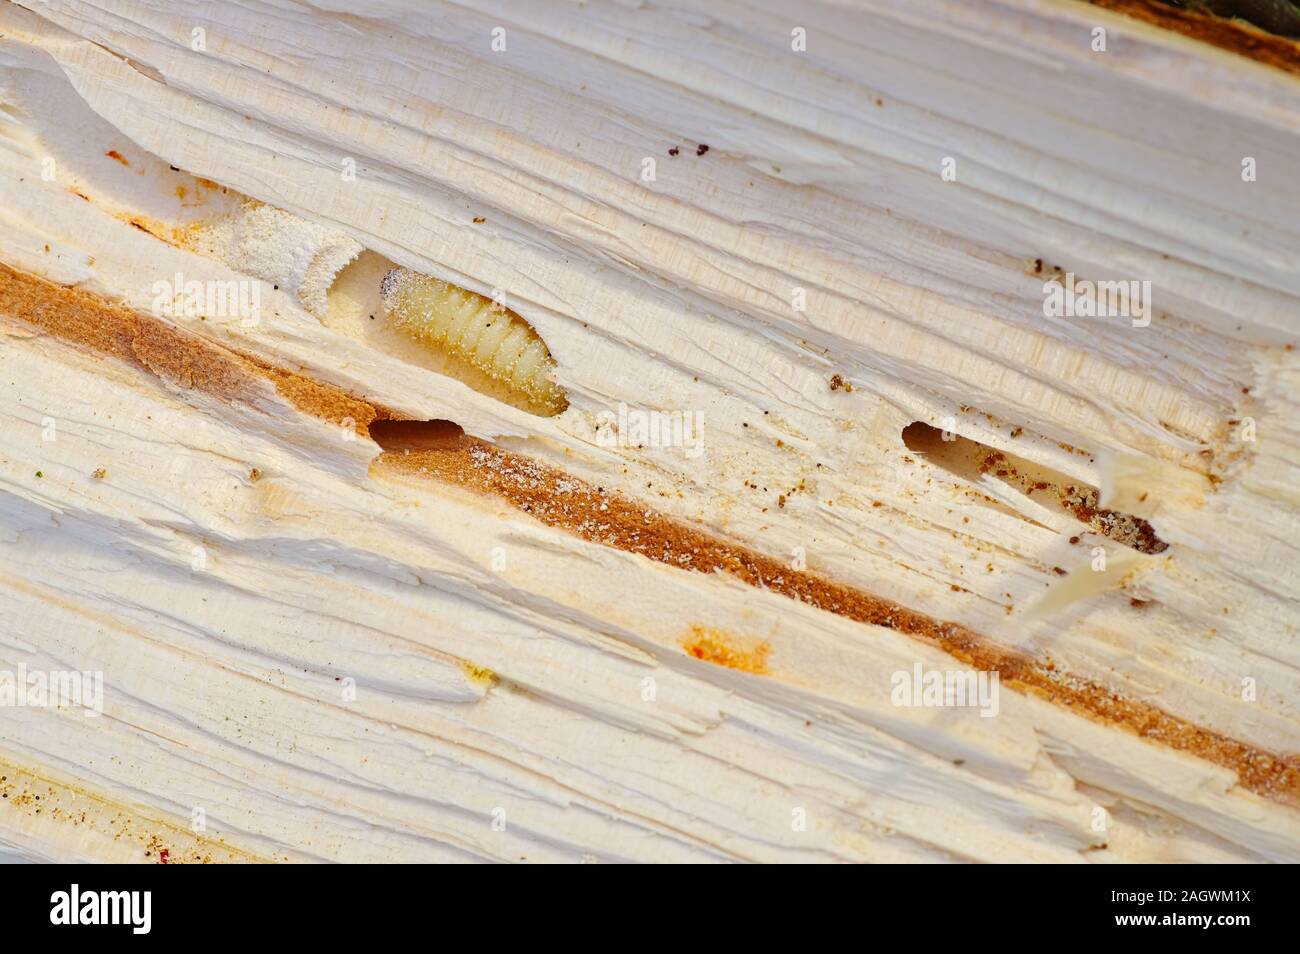 Bark Beetle pupae and galleries in spruce  wood Stock Photo